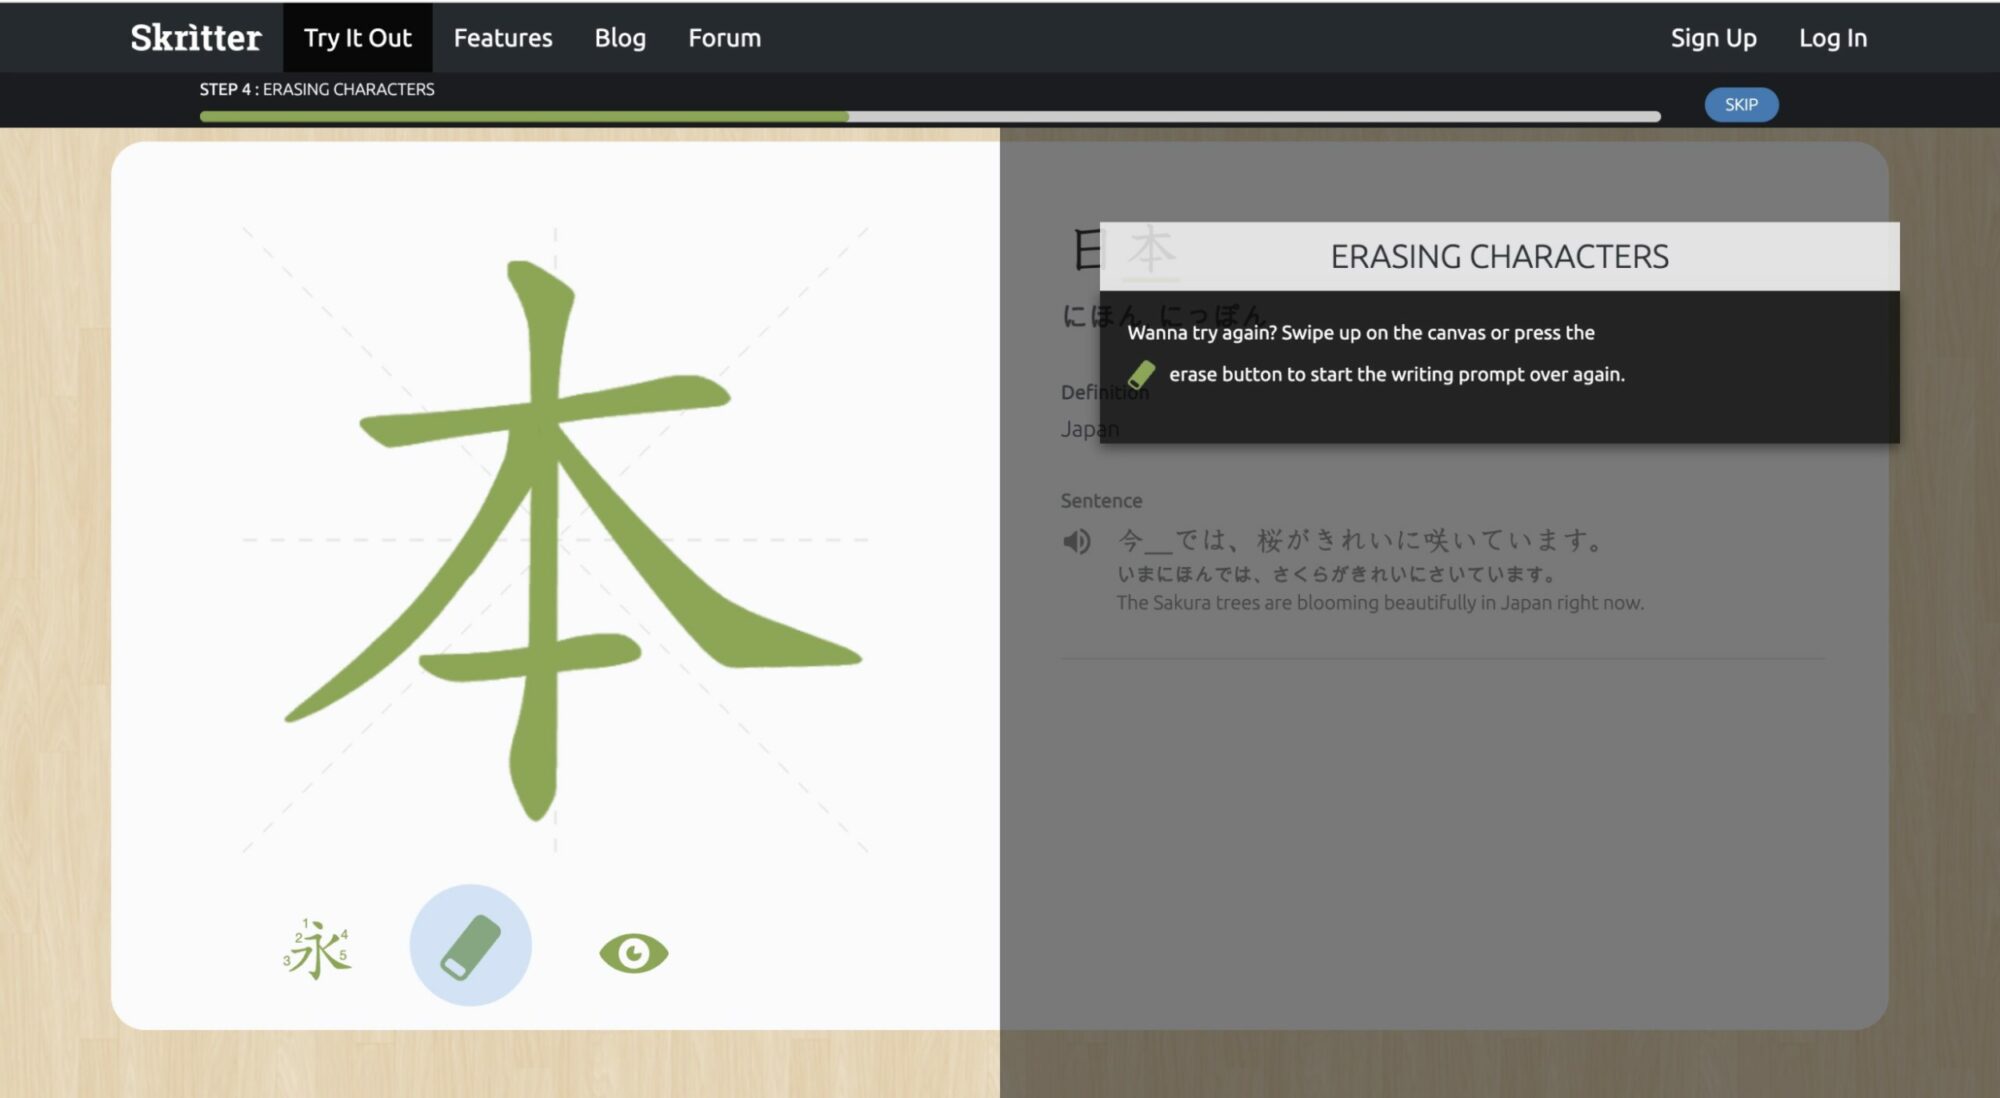 The Skritter app try it out feature, showing the kanji for origin (part of the kanji for Japan).